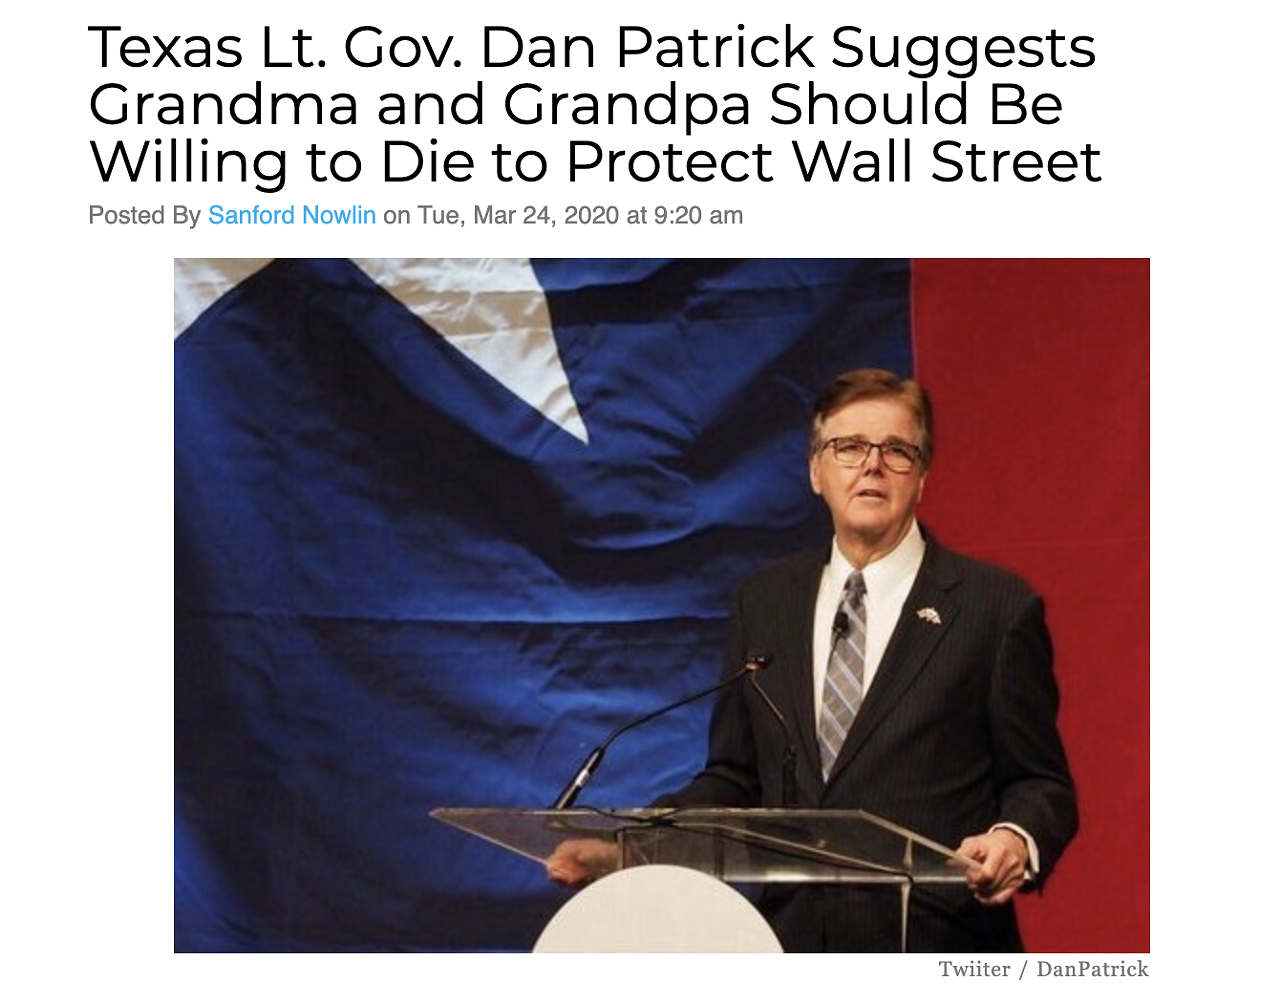 Lt. Gov. Dan Patrick, a former right-wing radio host, told Fox News that "lots" of grandparents are willing to die in the COVID-19 pandemic so they can ensure a better economy for their grandchildren. Read more here.